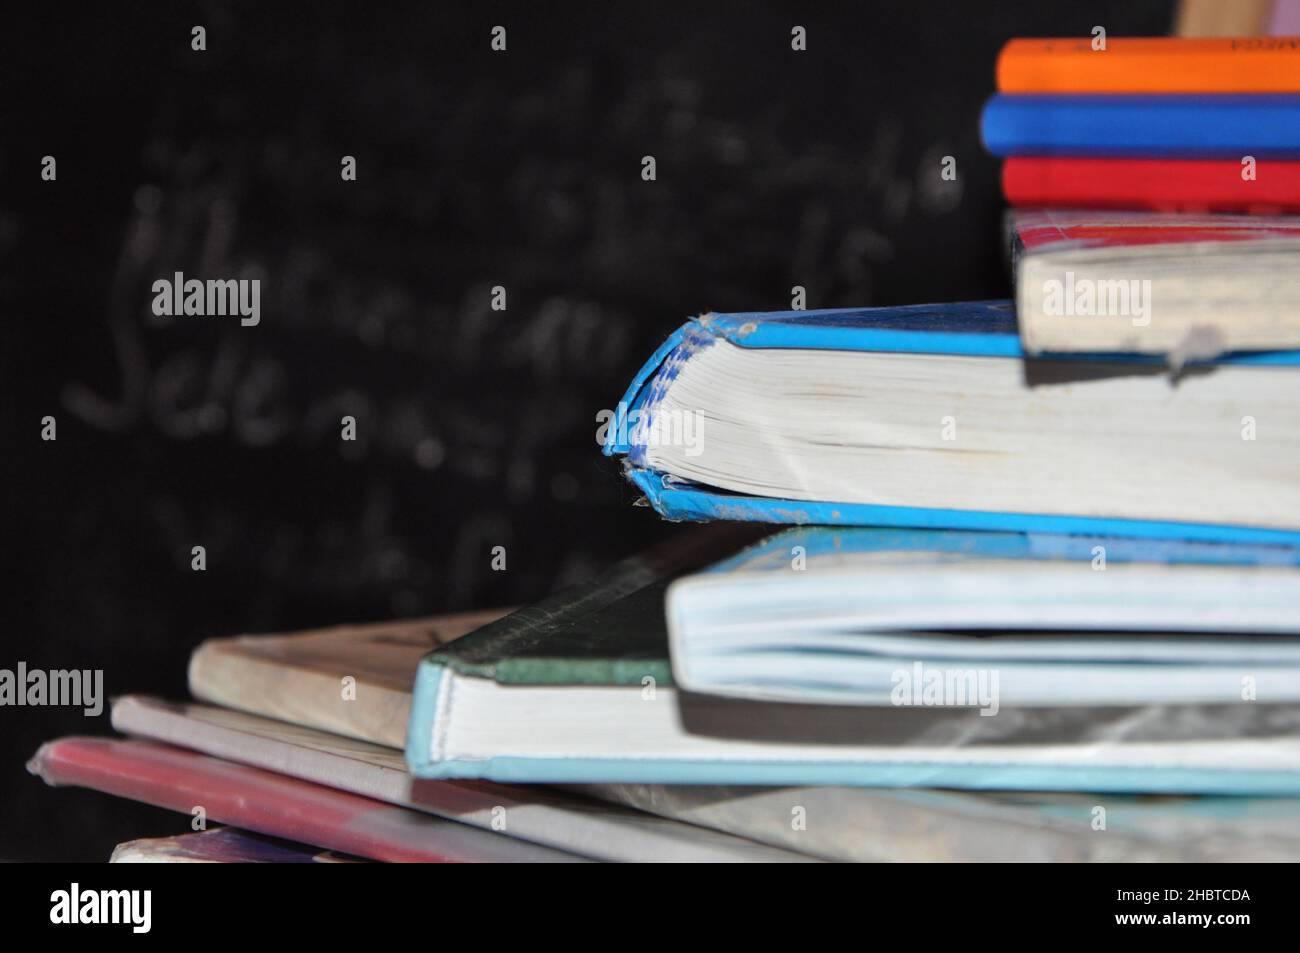 Pile of books with notes paper on wooden table with chalkboard in background.Pile of books on wooden table with blackboard background Stock Photo